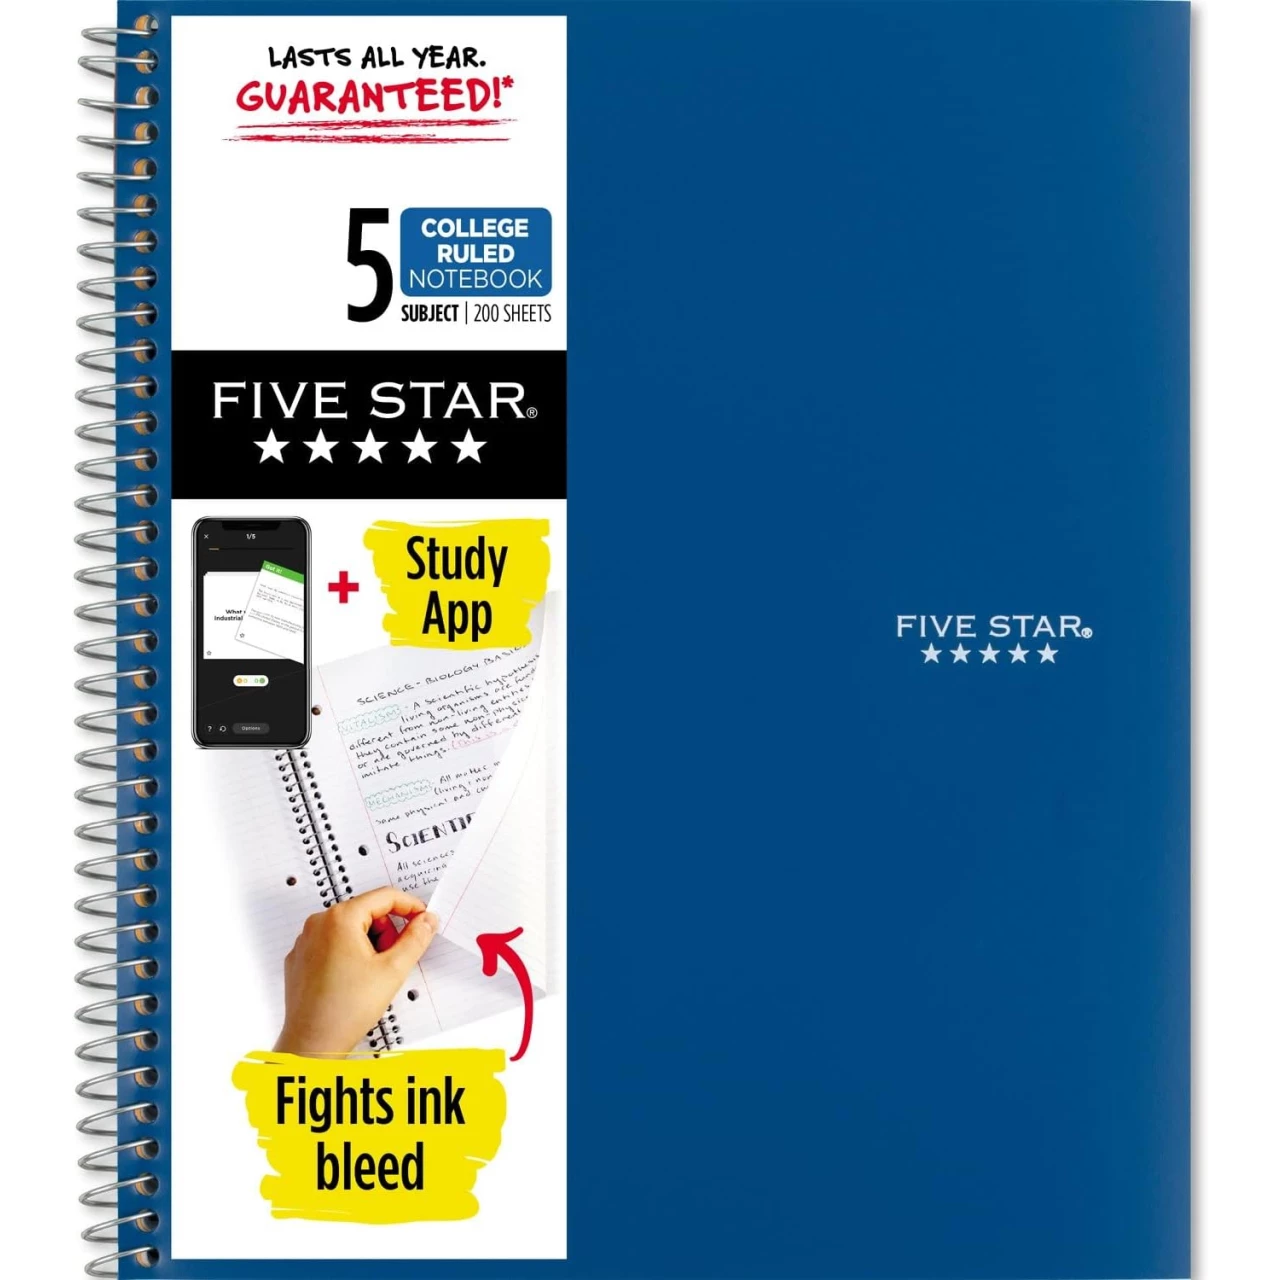 Five Star Spiral Notebook + Study App, 5 Subject, College Ruled Paper, Fights Ink Bleed, Water Resistant Cover, 8-1/2&quot; x 11&quot;, 200 Sheets, Blue (73635)